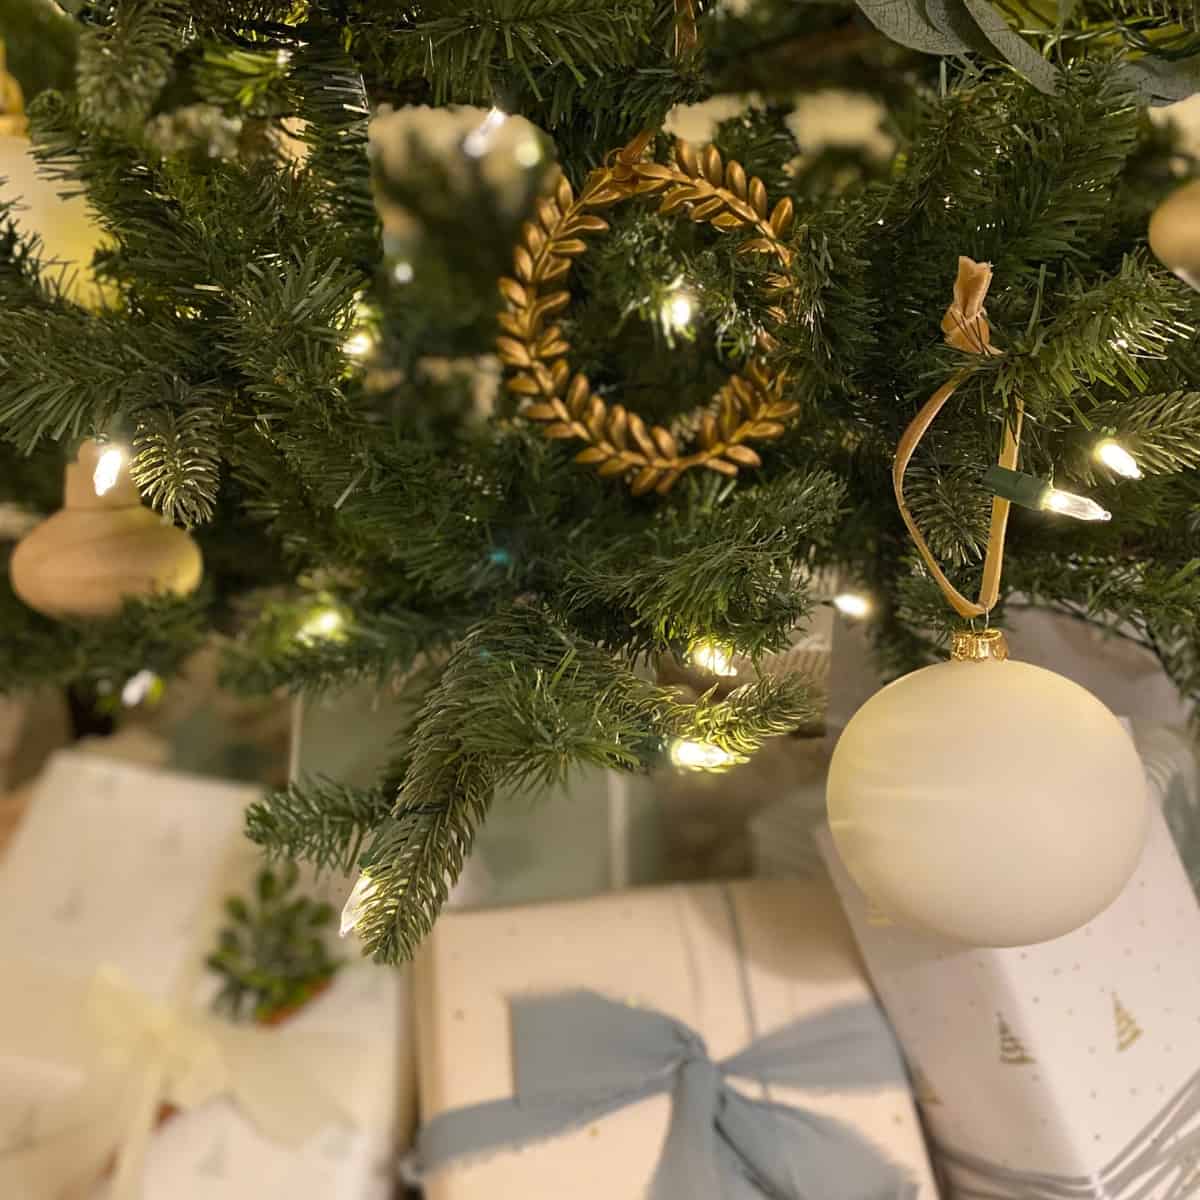 Matte white glass ball ornament and a brass laurel wreath Christmas ornament hangs above neutral presents